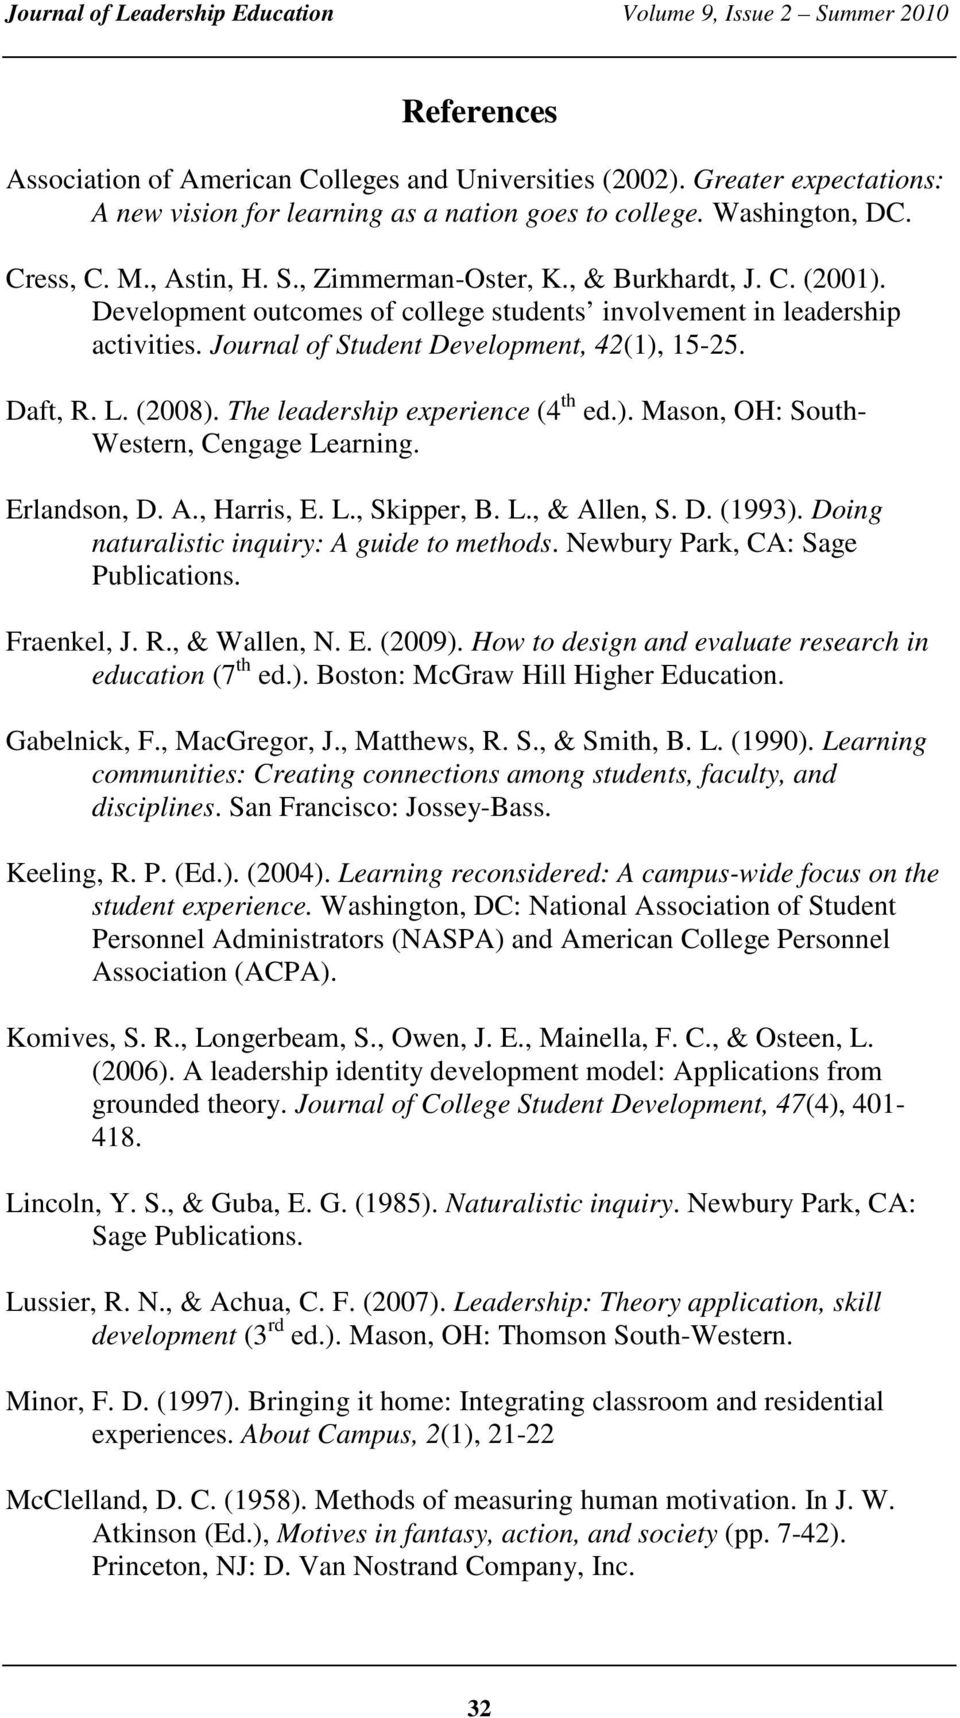 The leadership experience (4 th ed.). Mason, OH: South- Western, Cengage Learning. Erlandson, D. A., Harris, E. L., Skipper, B. L., & Allen, S. D. (1993).